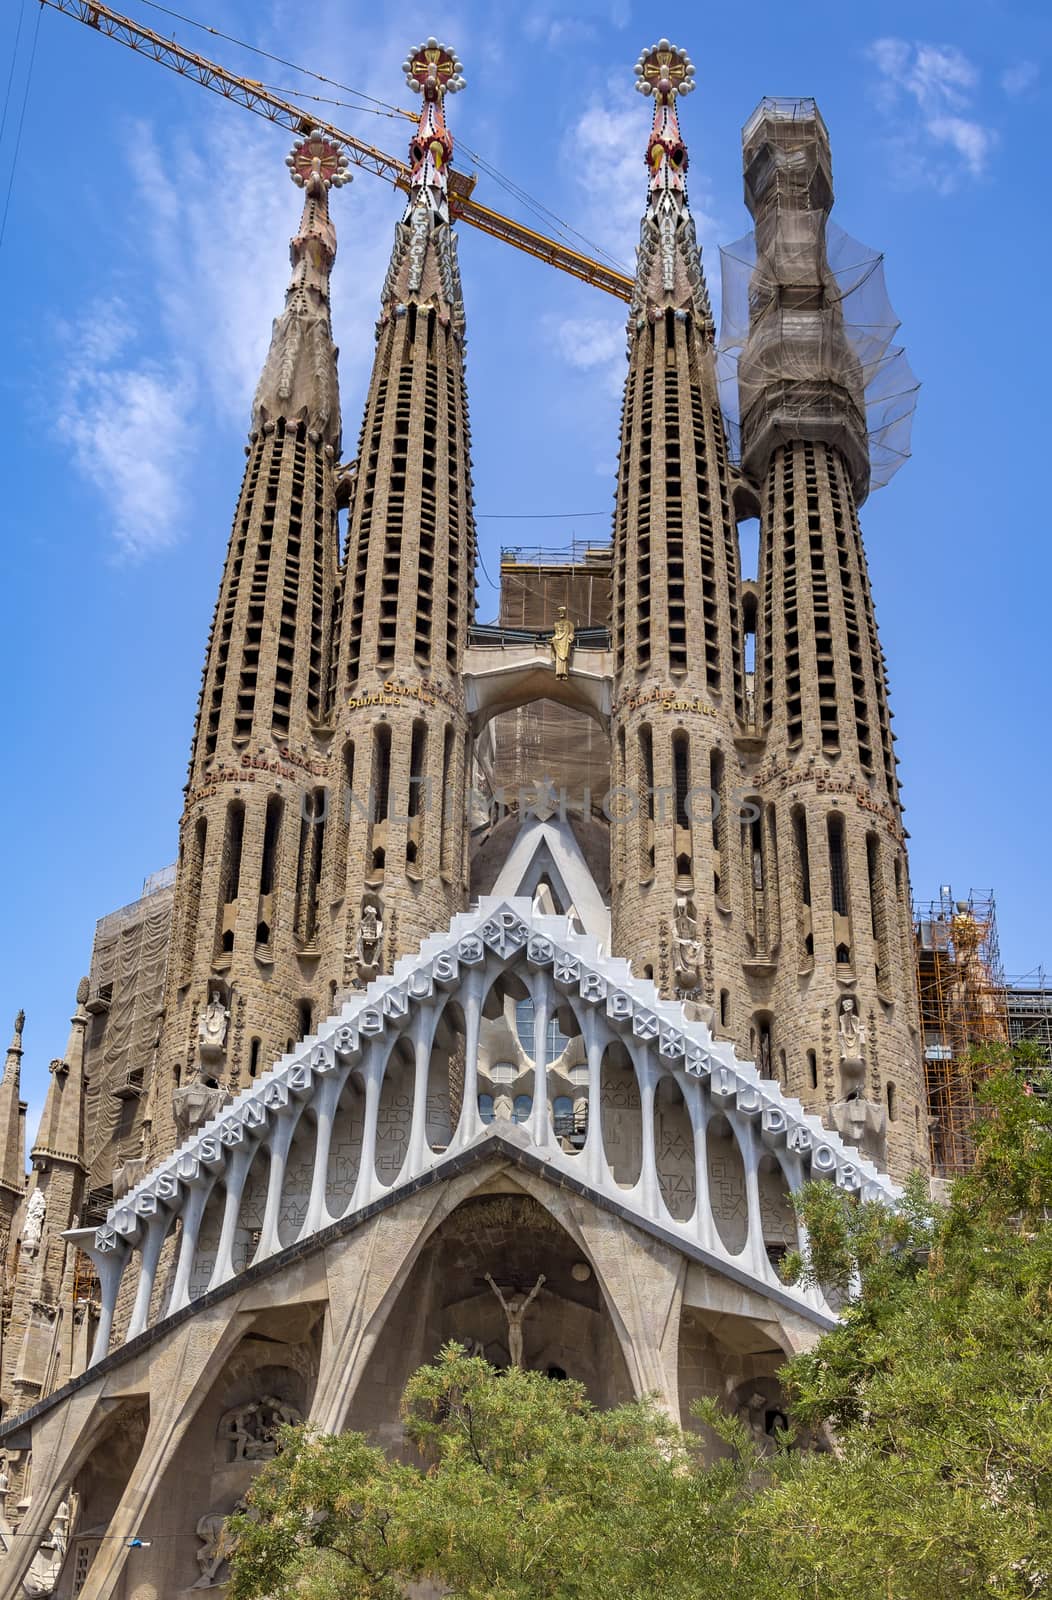 BARCELONA, SPAIN - JULY 5, 2016: La Sagrada Familia - the impressive cathedral designed by Gaudi, which is being build since 19 March 1882 and is not finished yet.

Barcelona, Spain - July 5, 2016: La Sagrada Familia - the impressive cathedral designed by Gaudi, which is being build since 19 March 1882 and is not finished yet. People are walking by park.